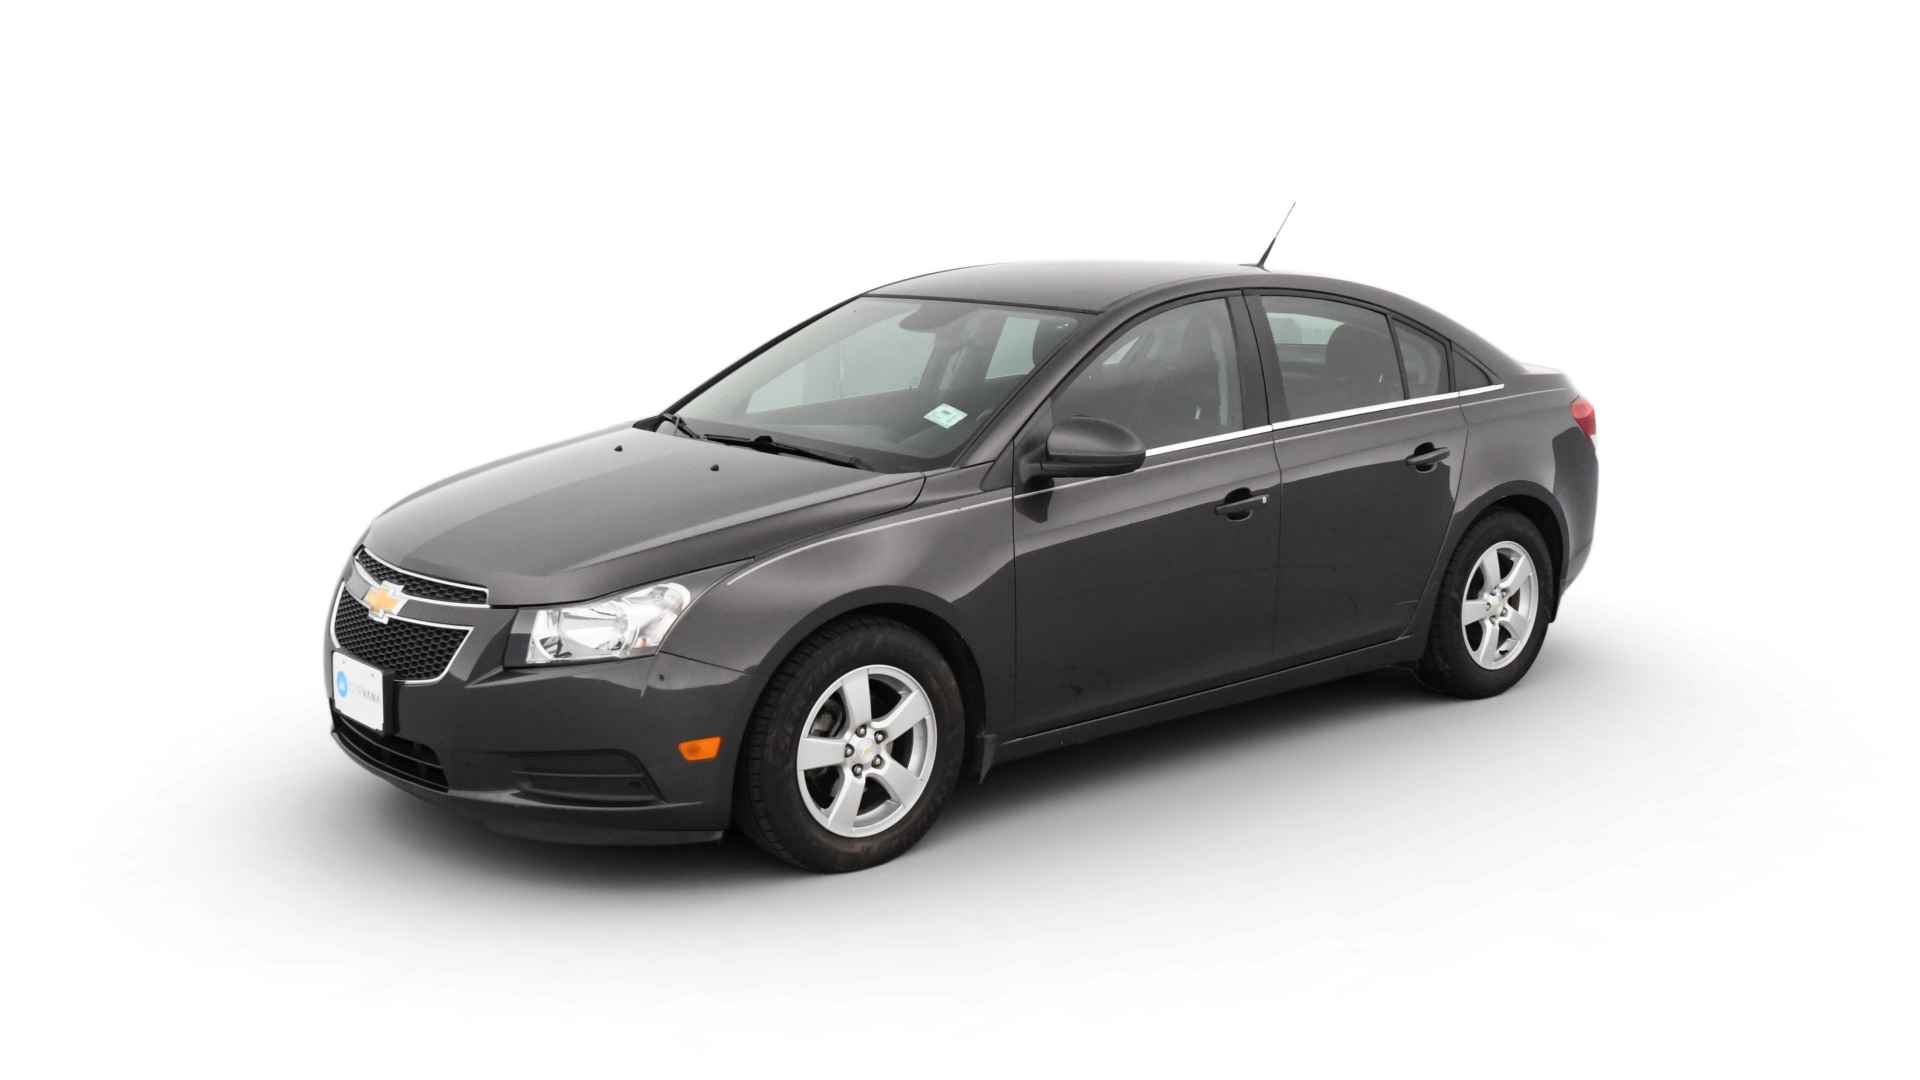 Used 2009-2014 Chevrolet Cruze for Sale Online